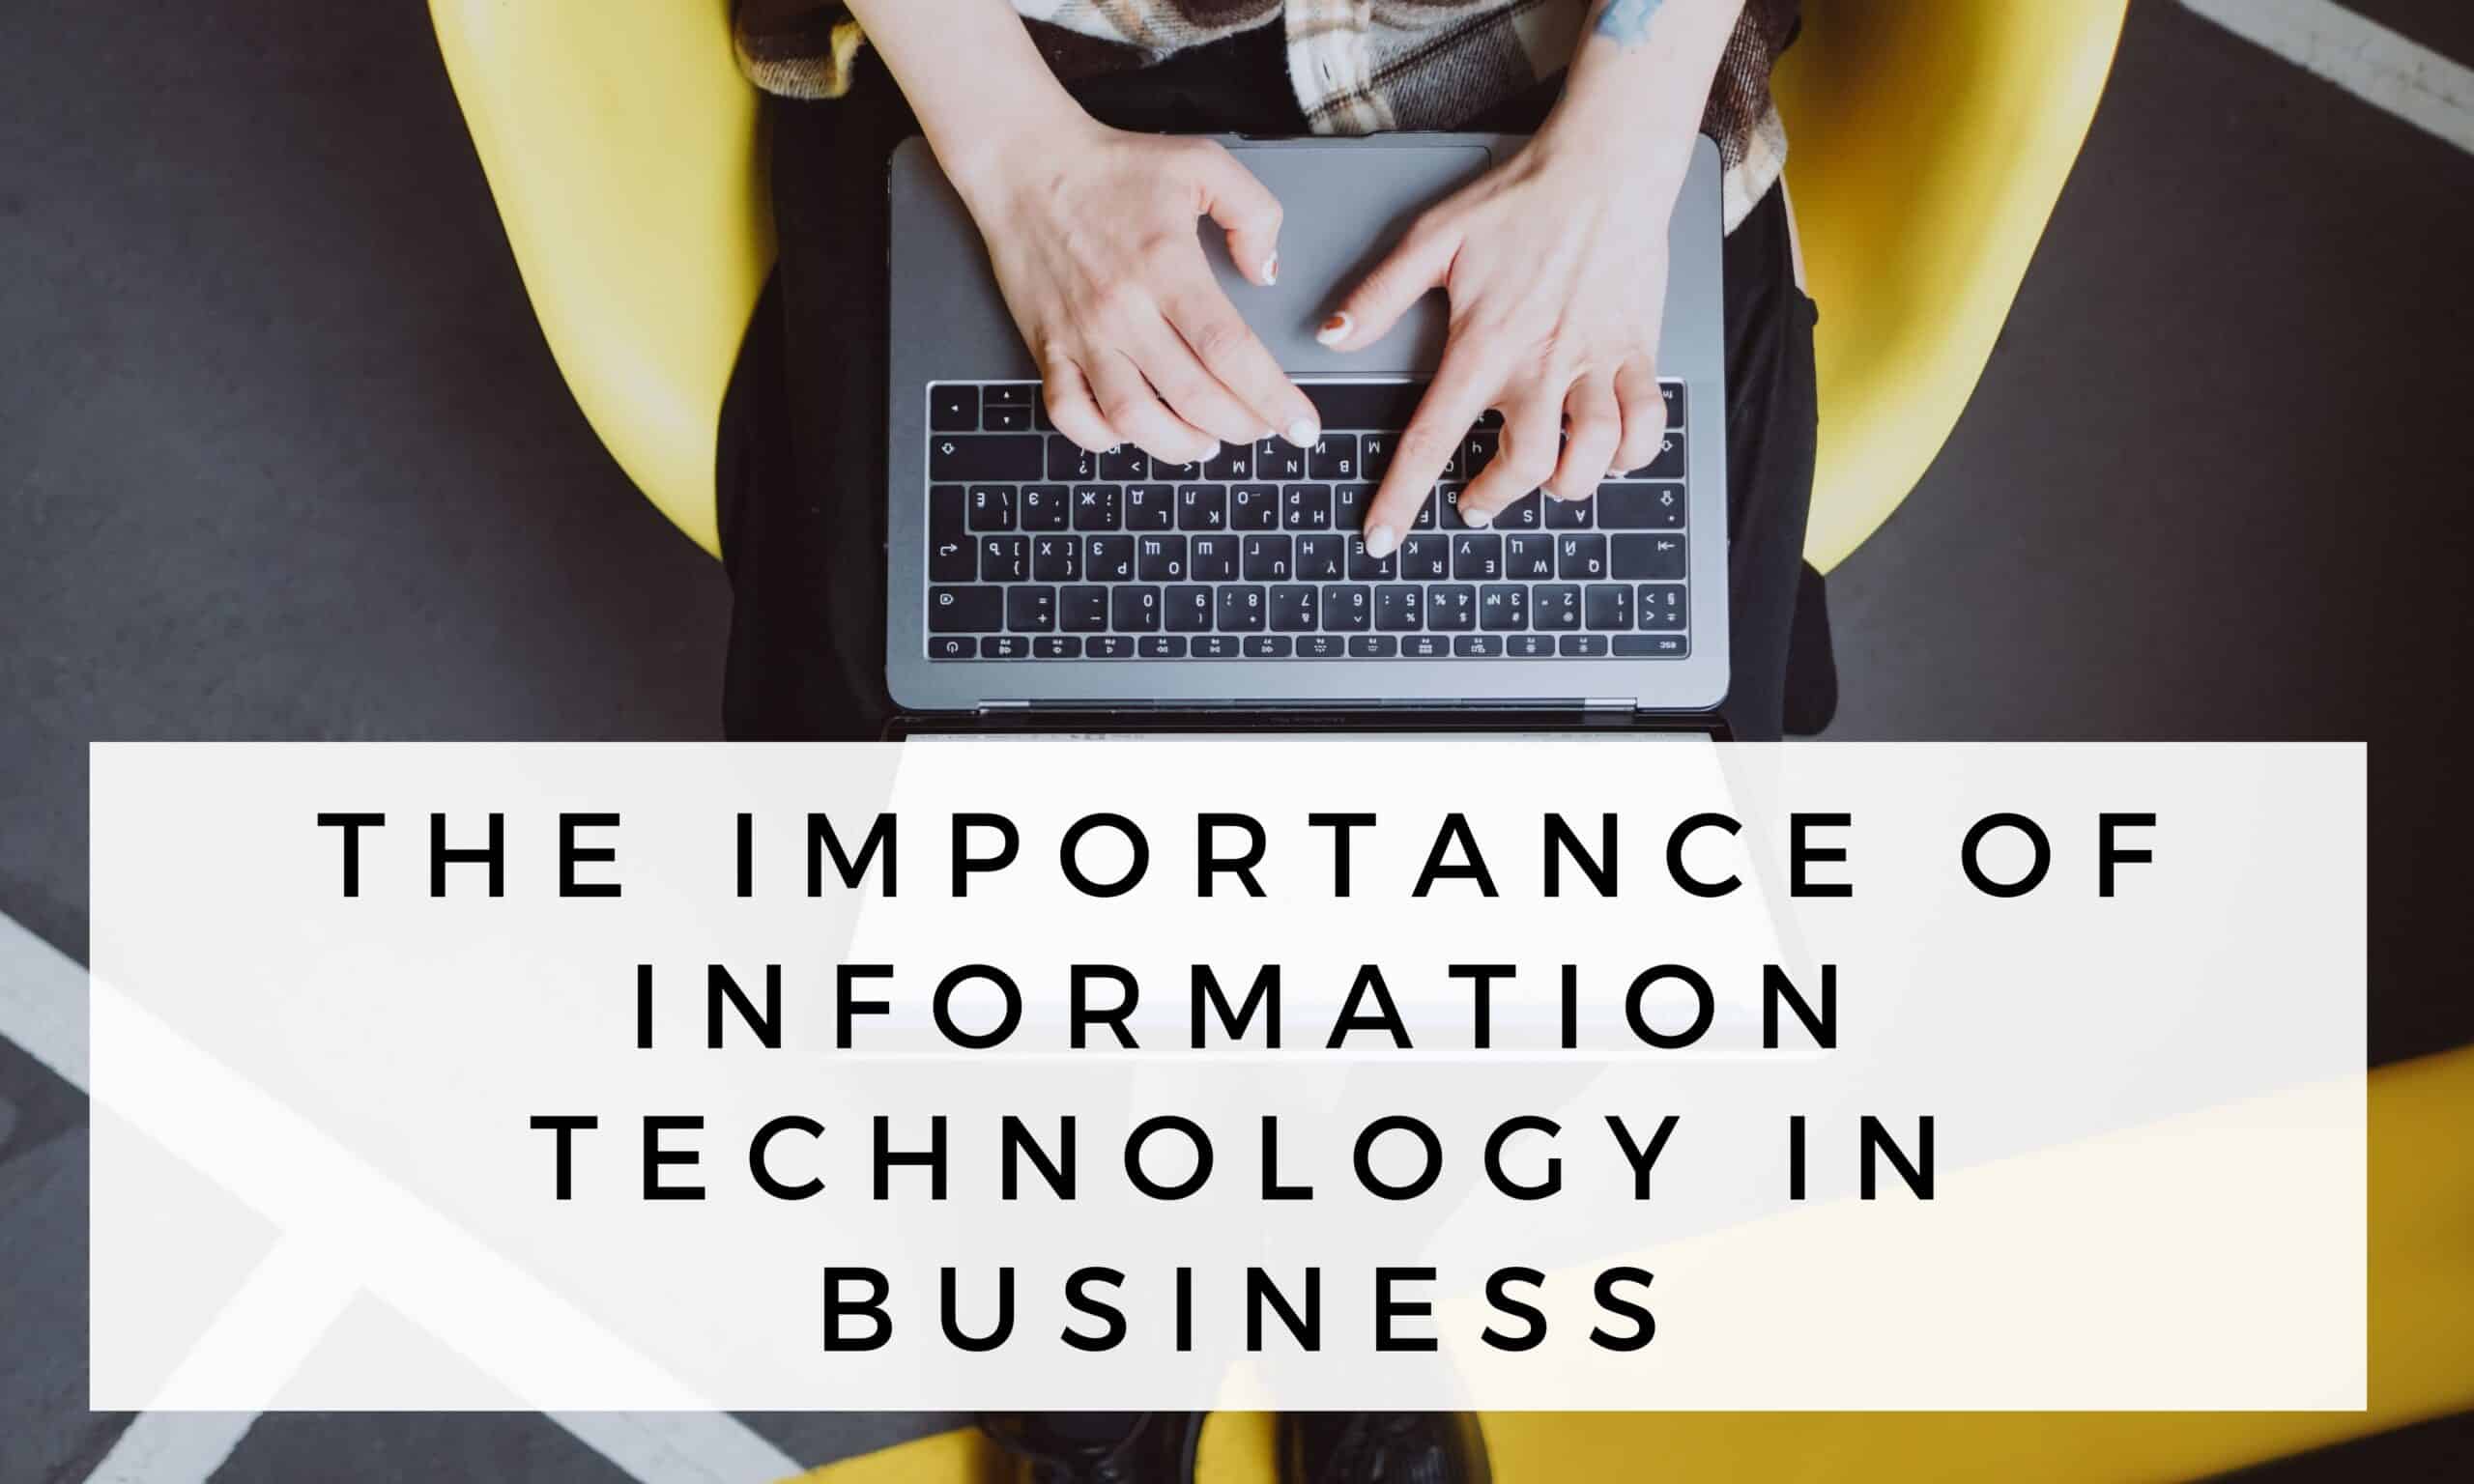 IMPORTANCE OF INFORMATION TECHNOLOGY IN BUSINESS